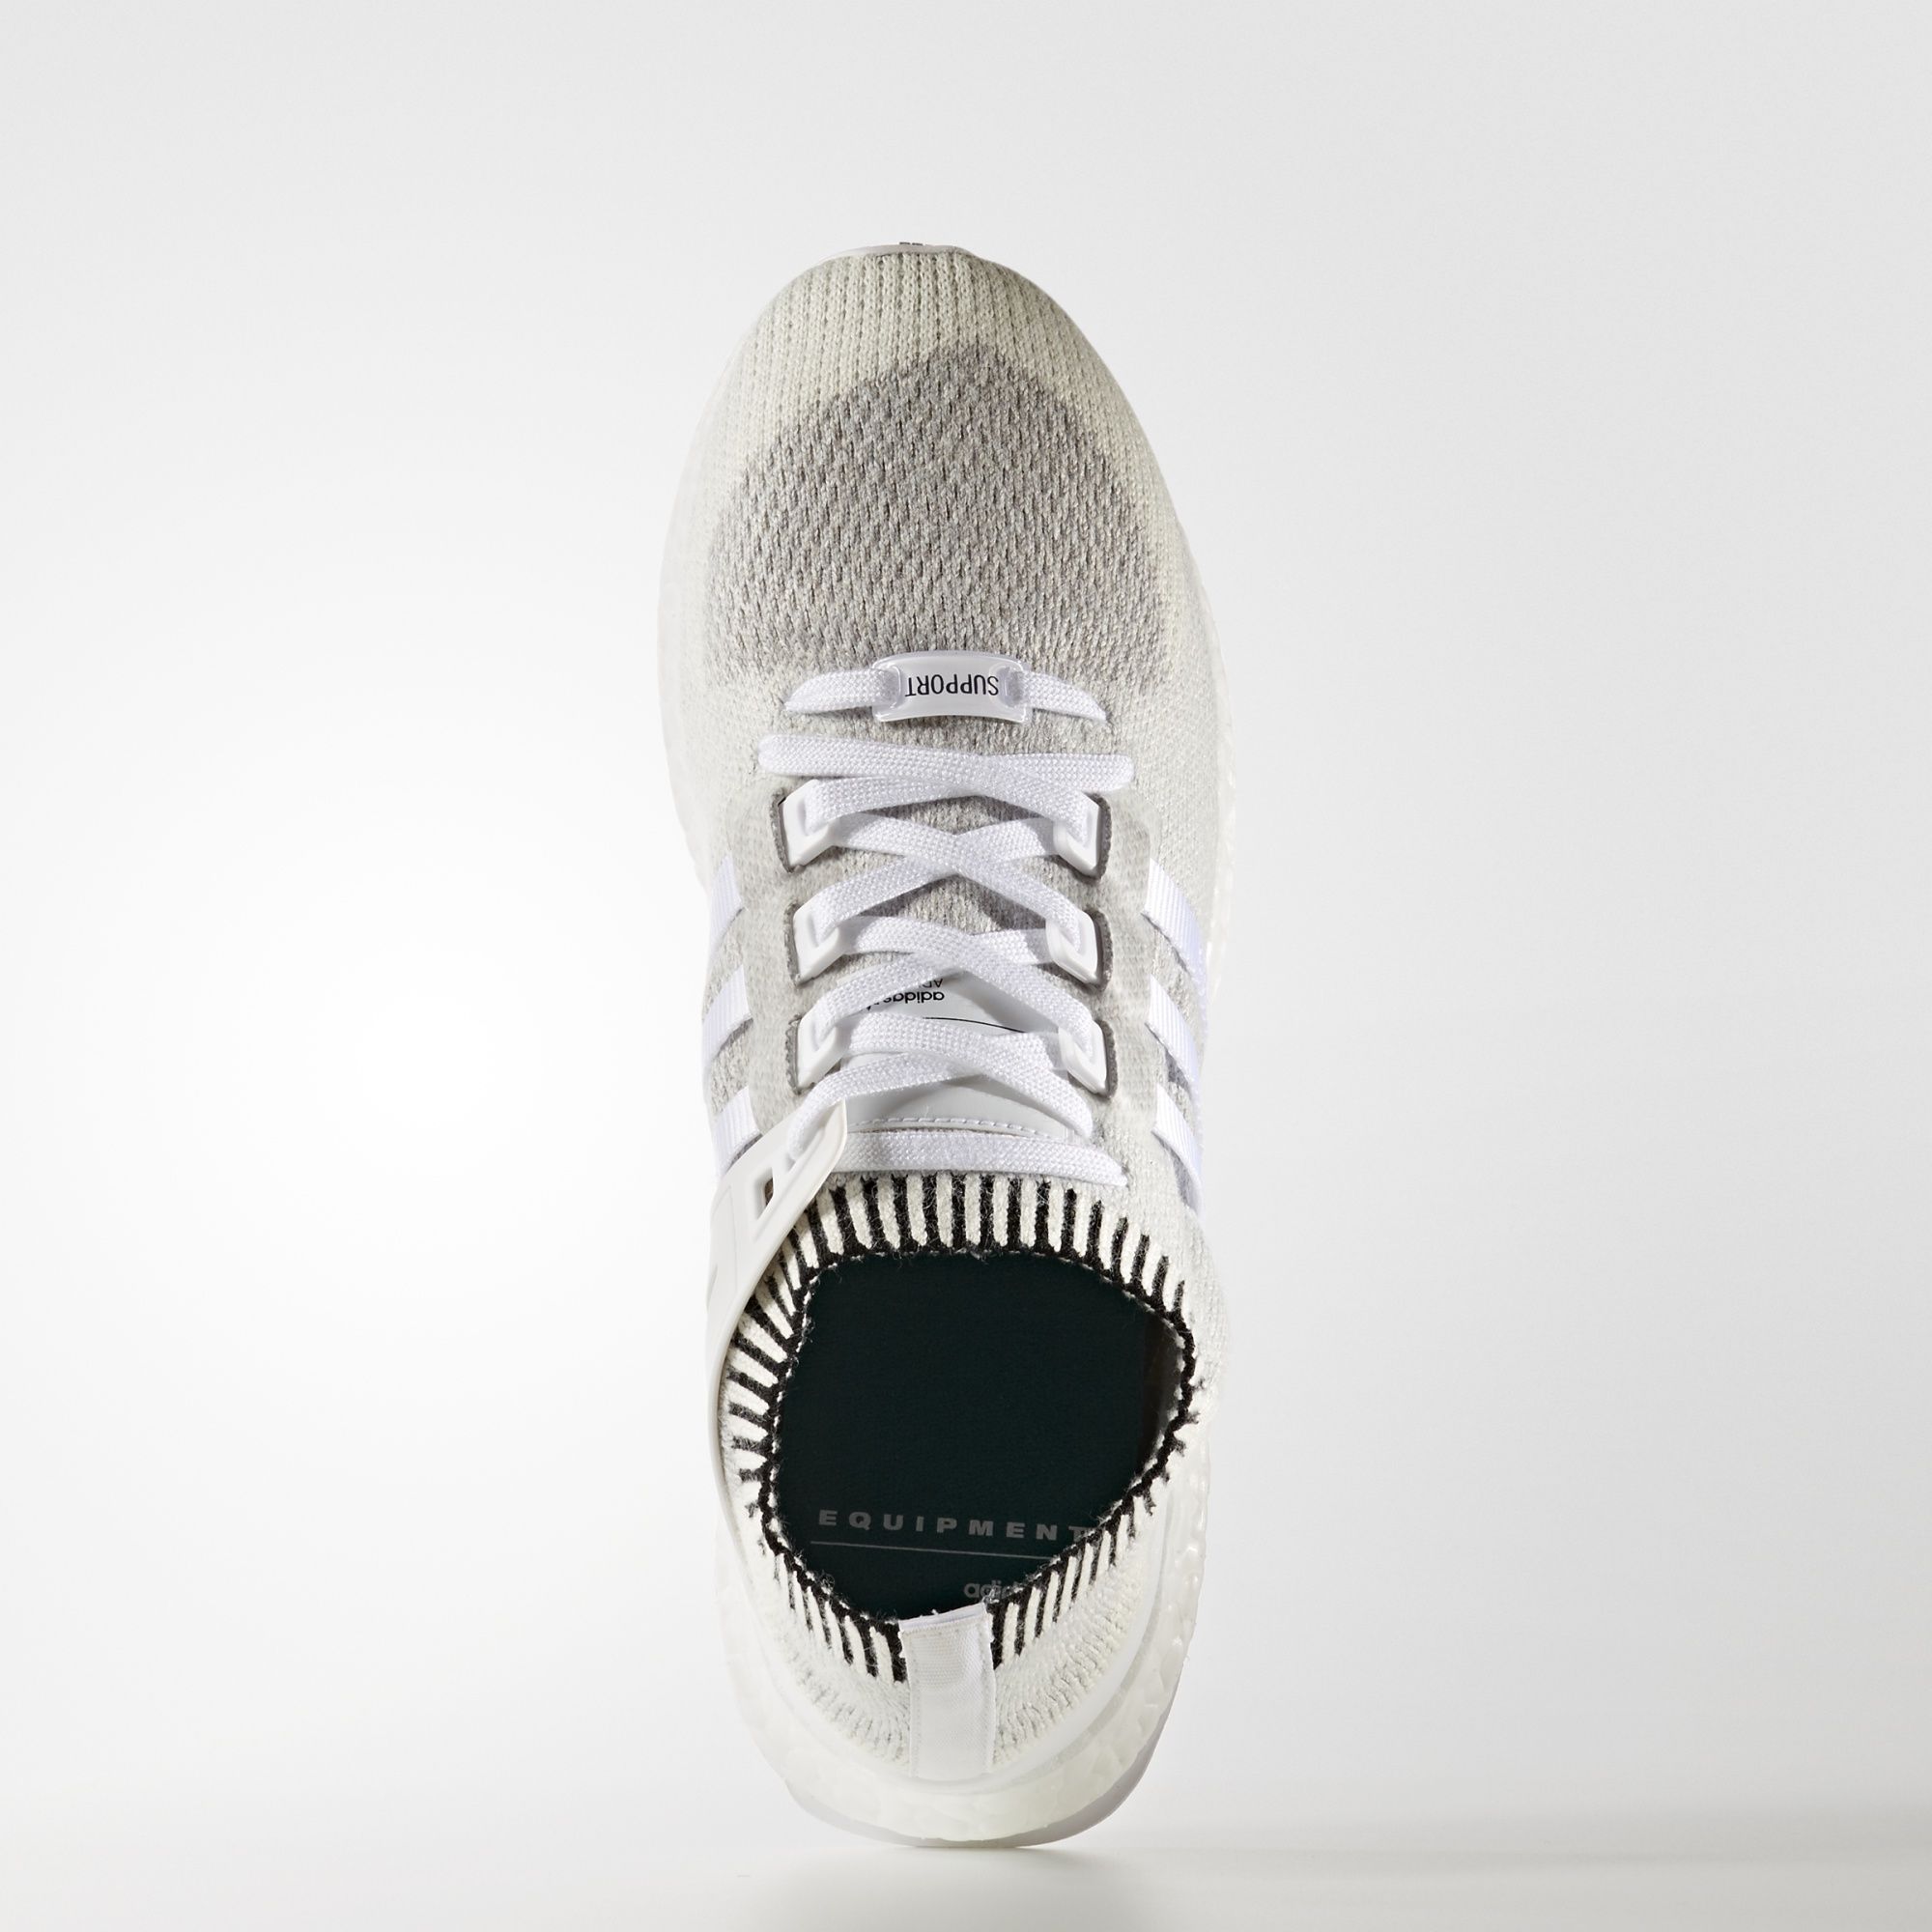 adidas-eqt-support-ultra-pk-vintage-white-5